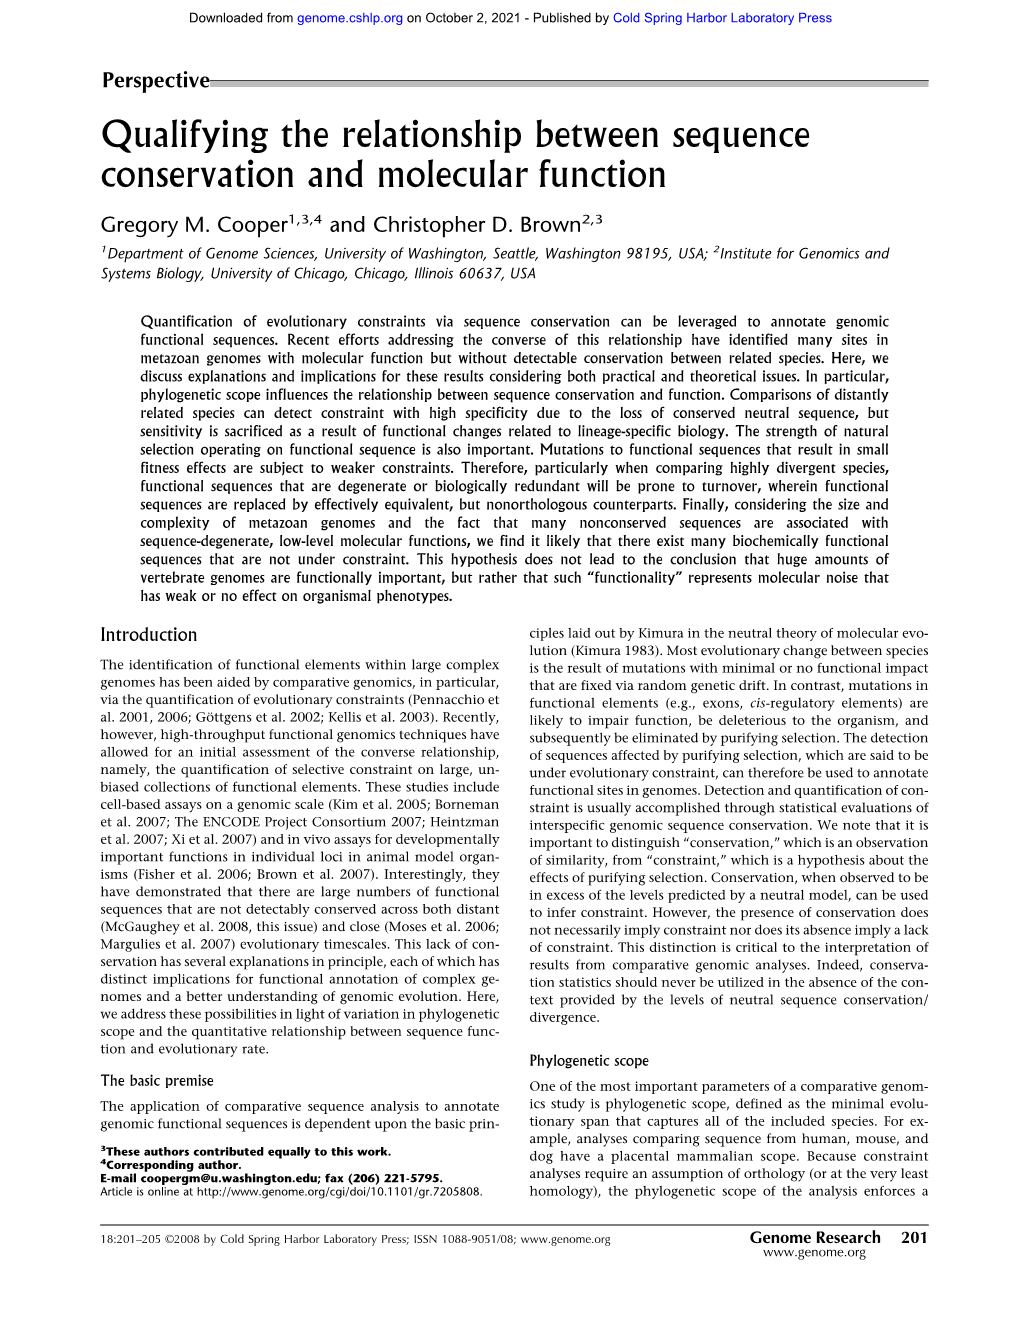 Qualifying the Relationship Between Sequence Conservation and Molecular Function